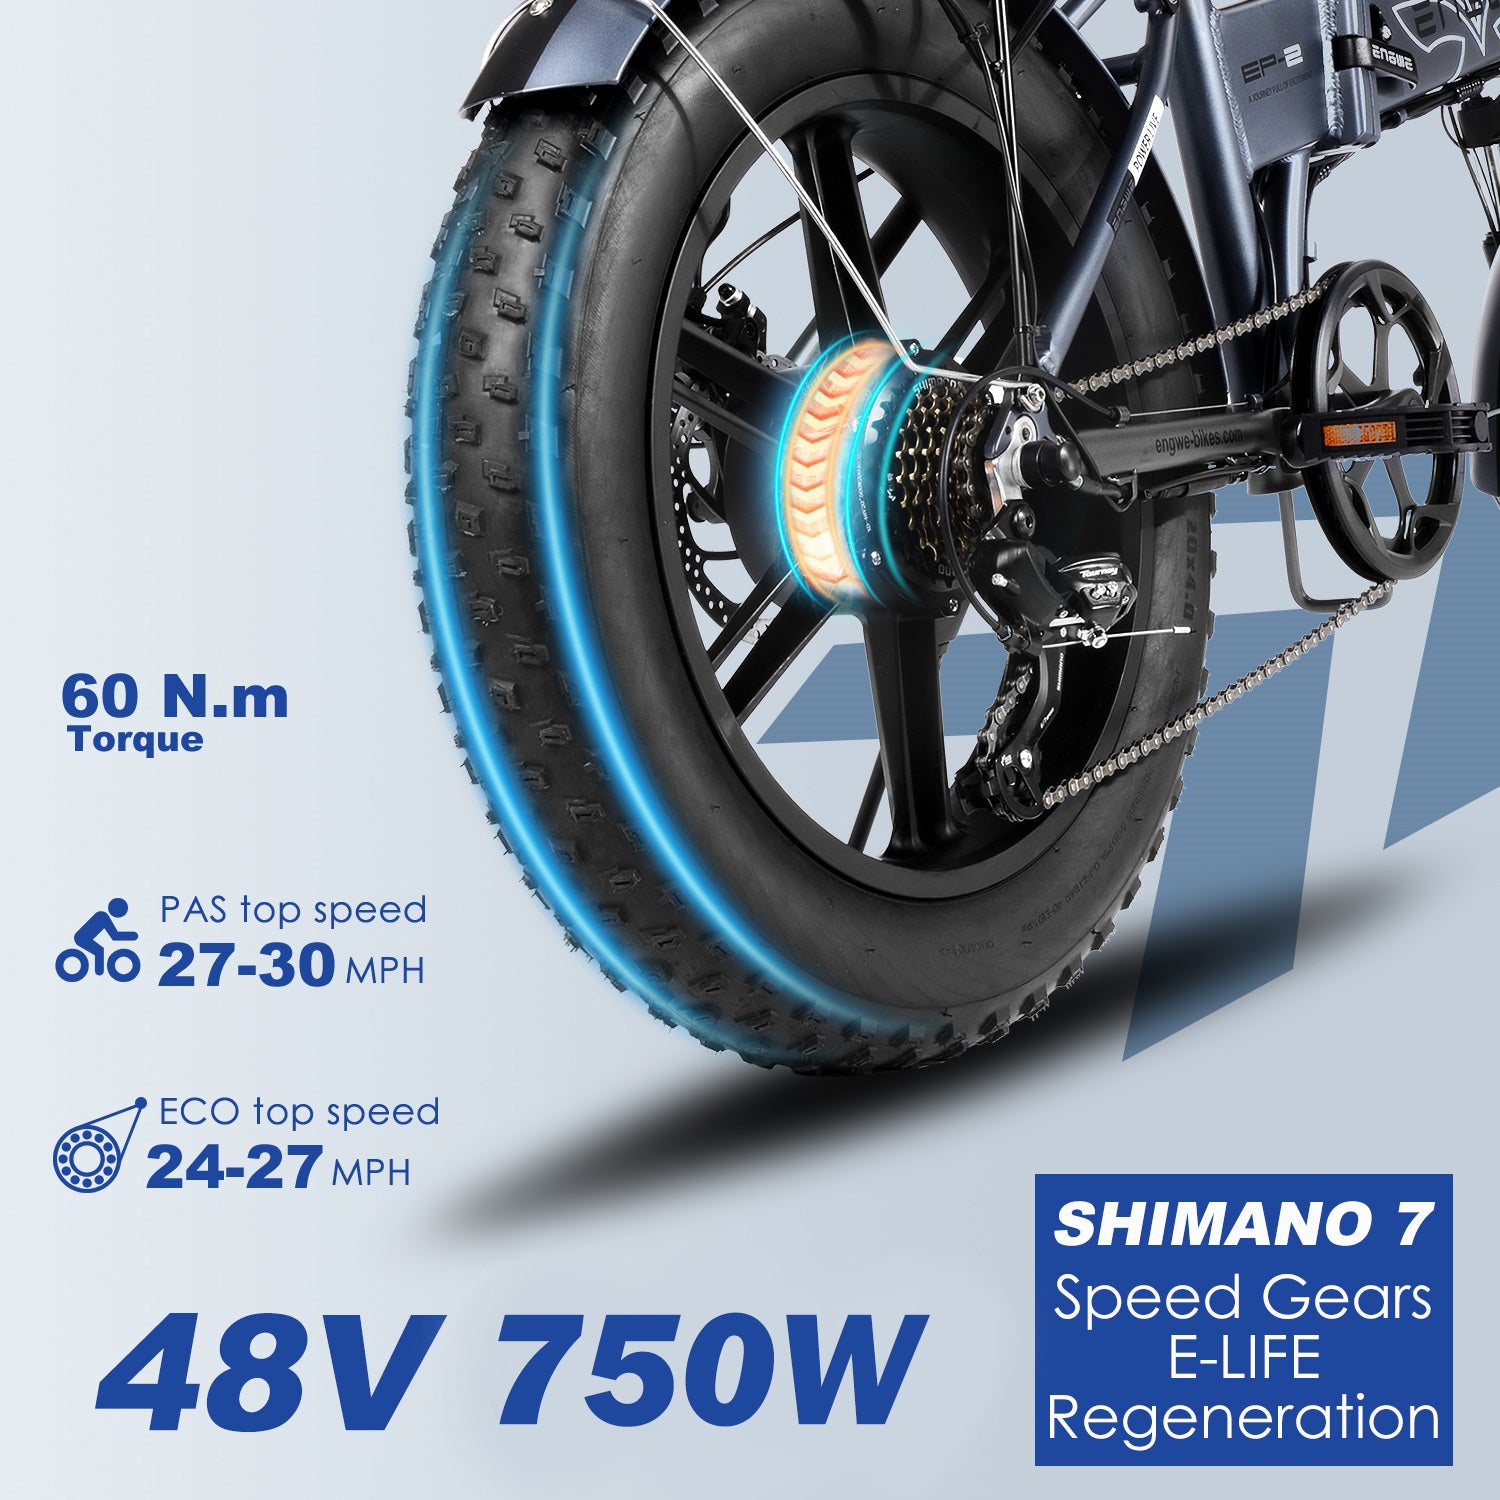 Engwe EP-2 Pro electric bike wheel showcasing the torque power and Shimano 7-speed gears for versatile cycling.